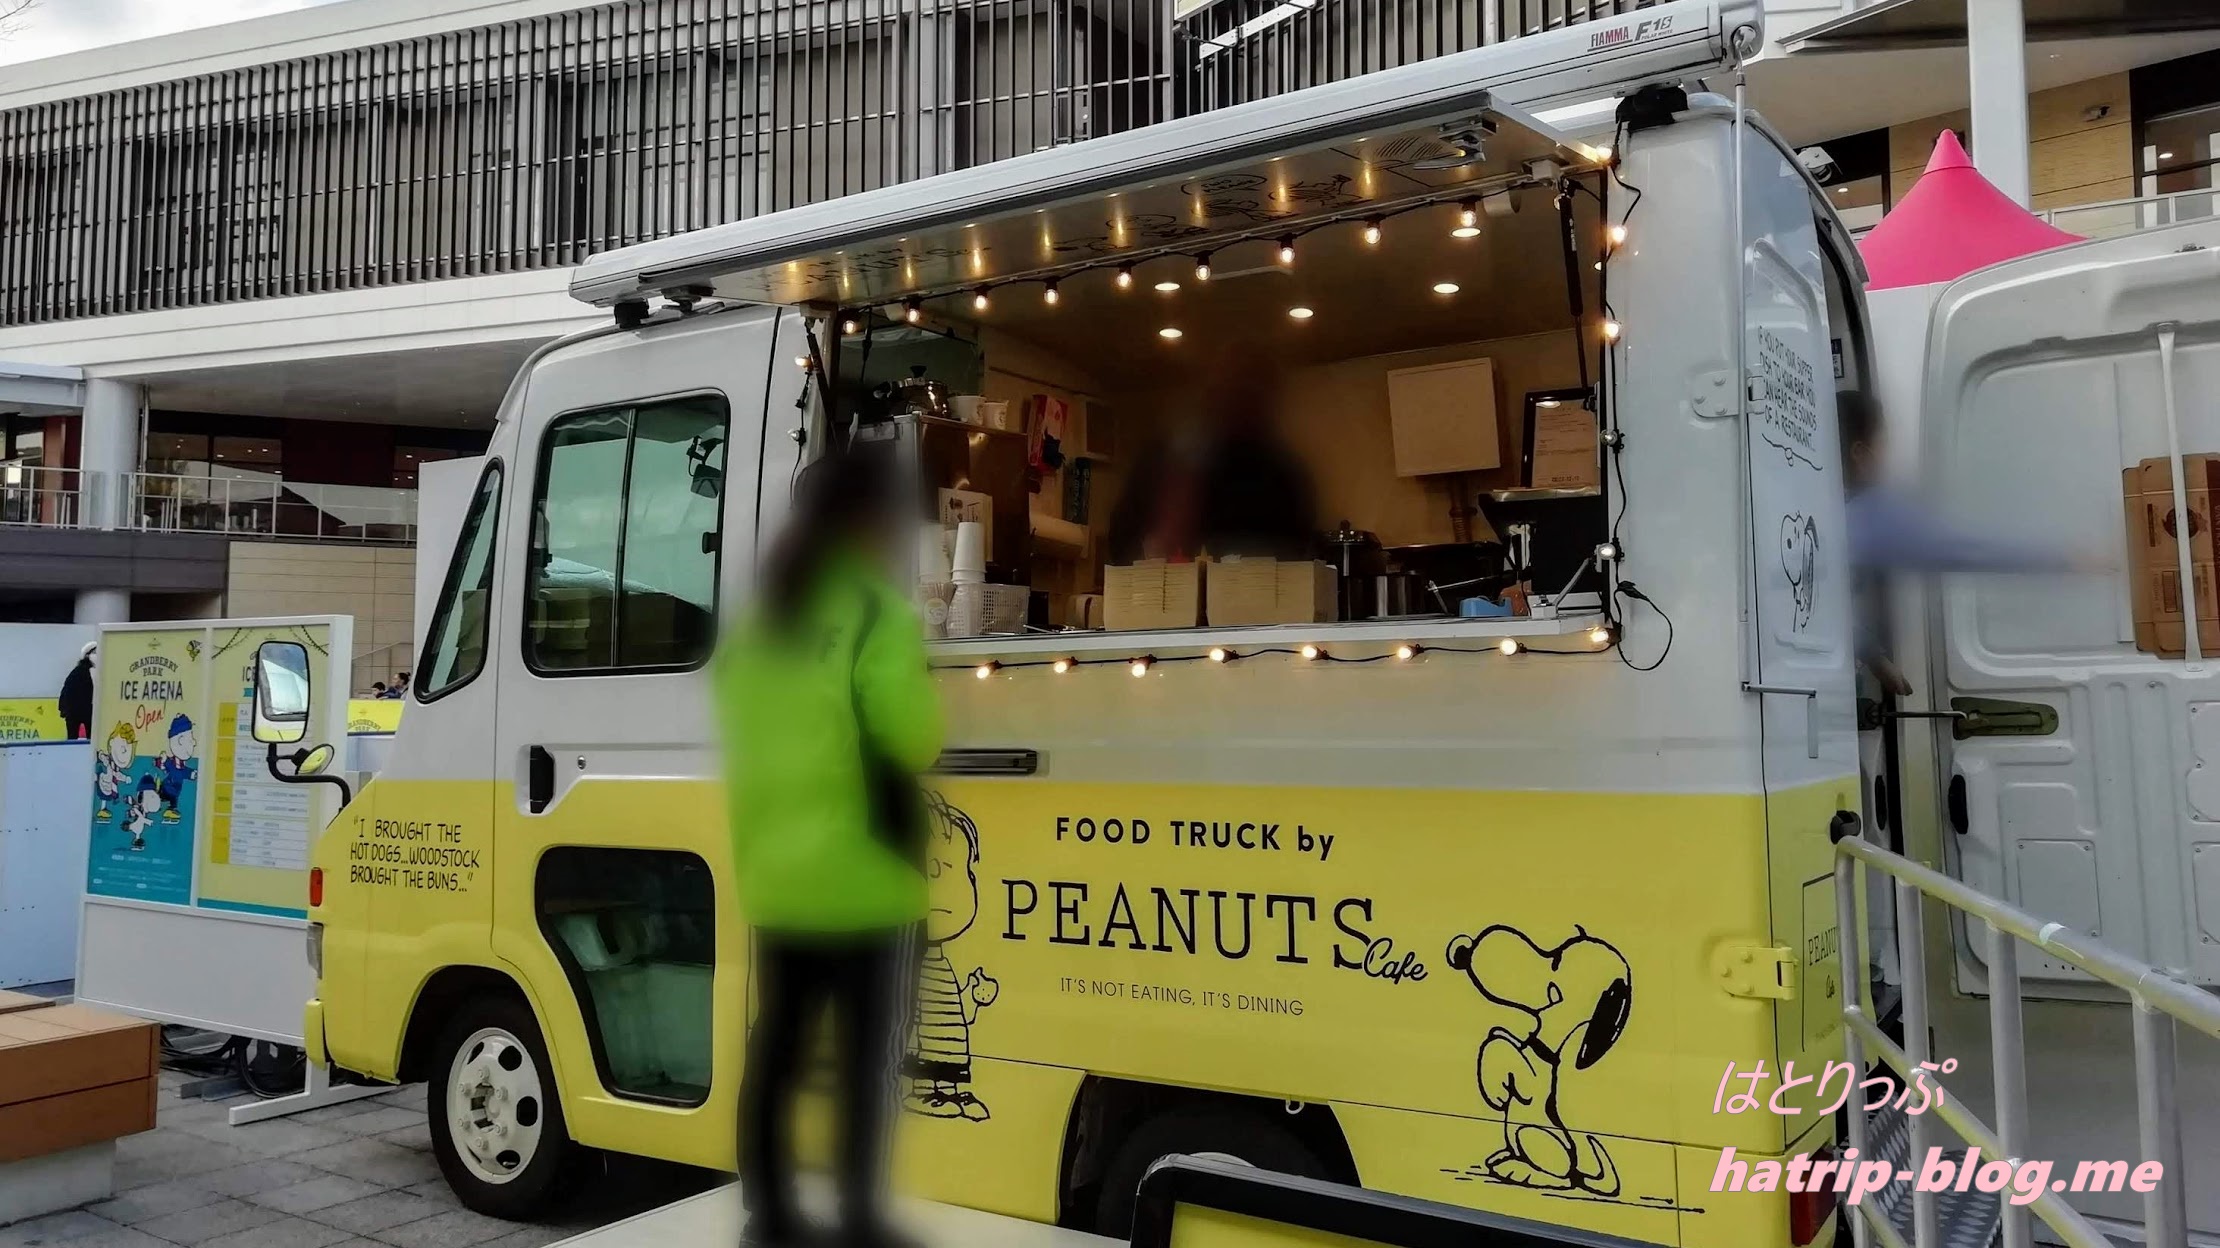 FOOD TRUCK by PEANUTS Cafe